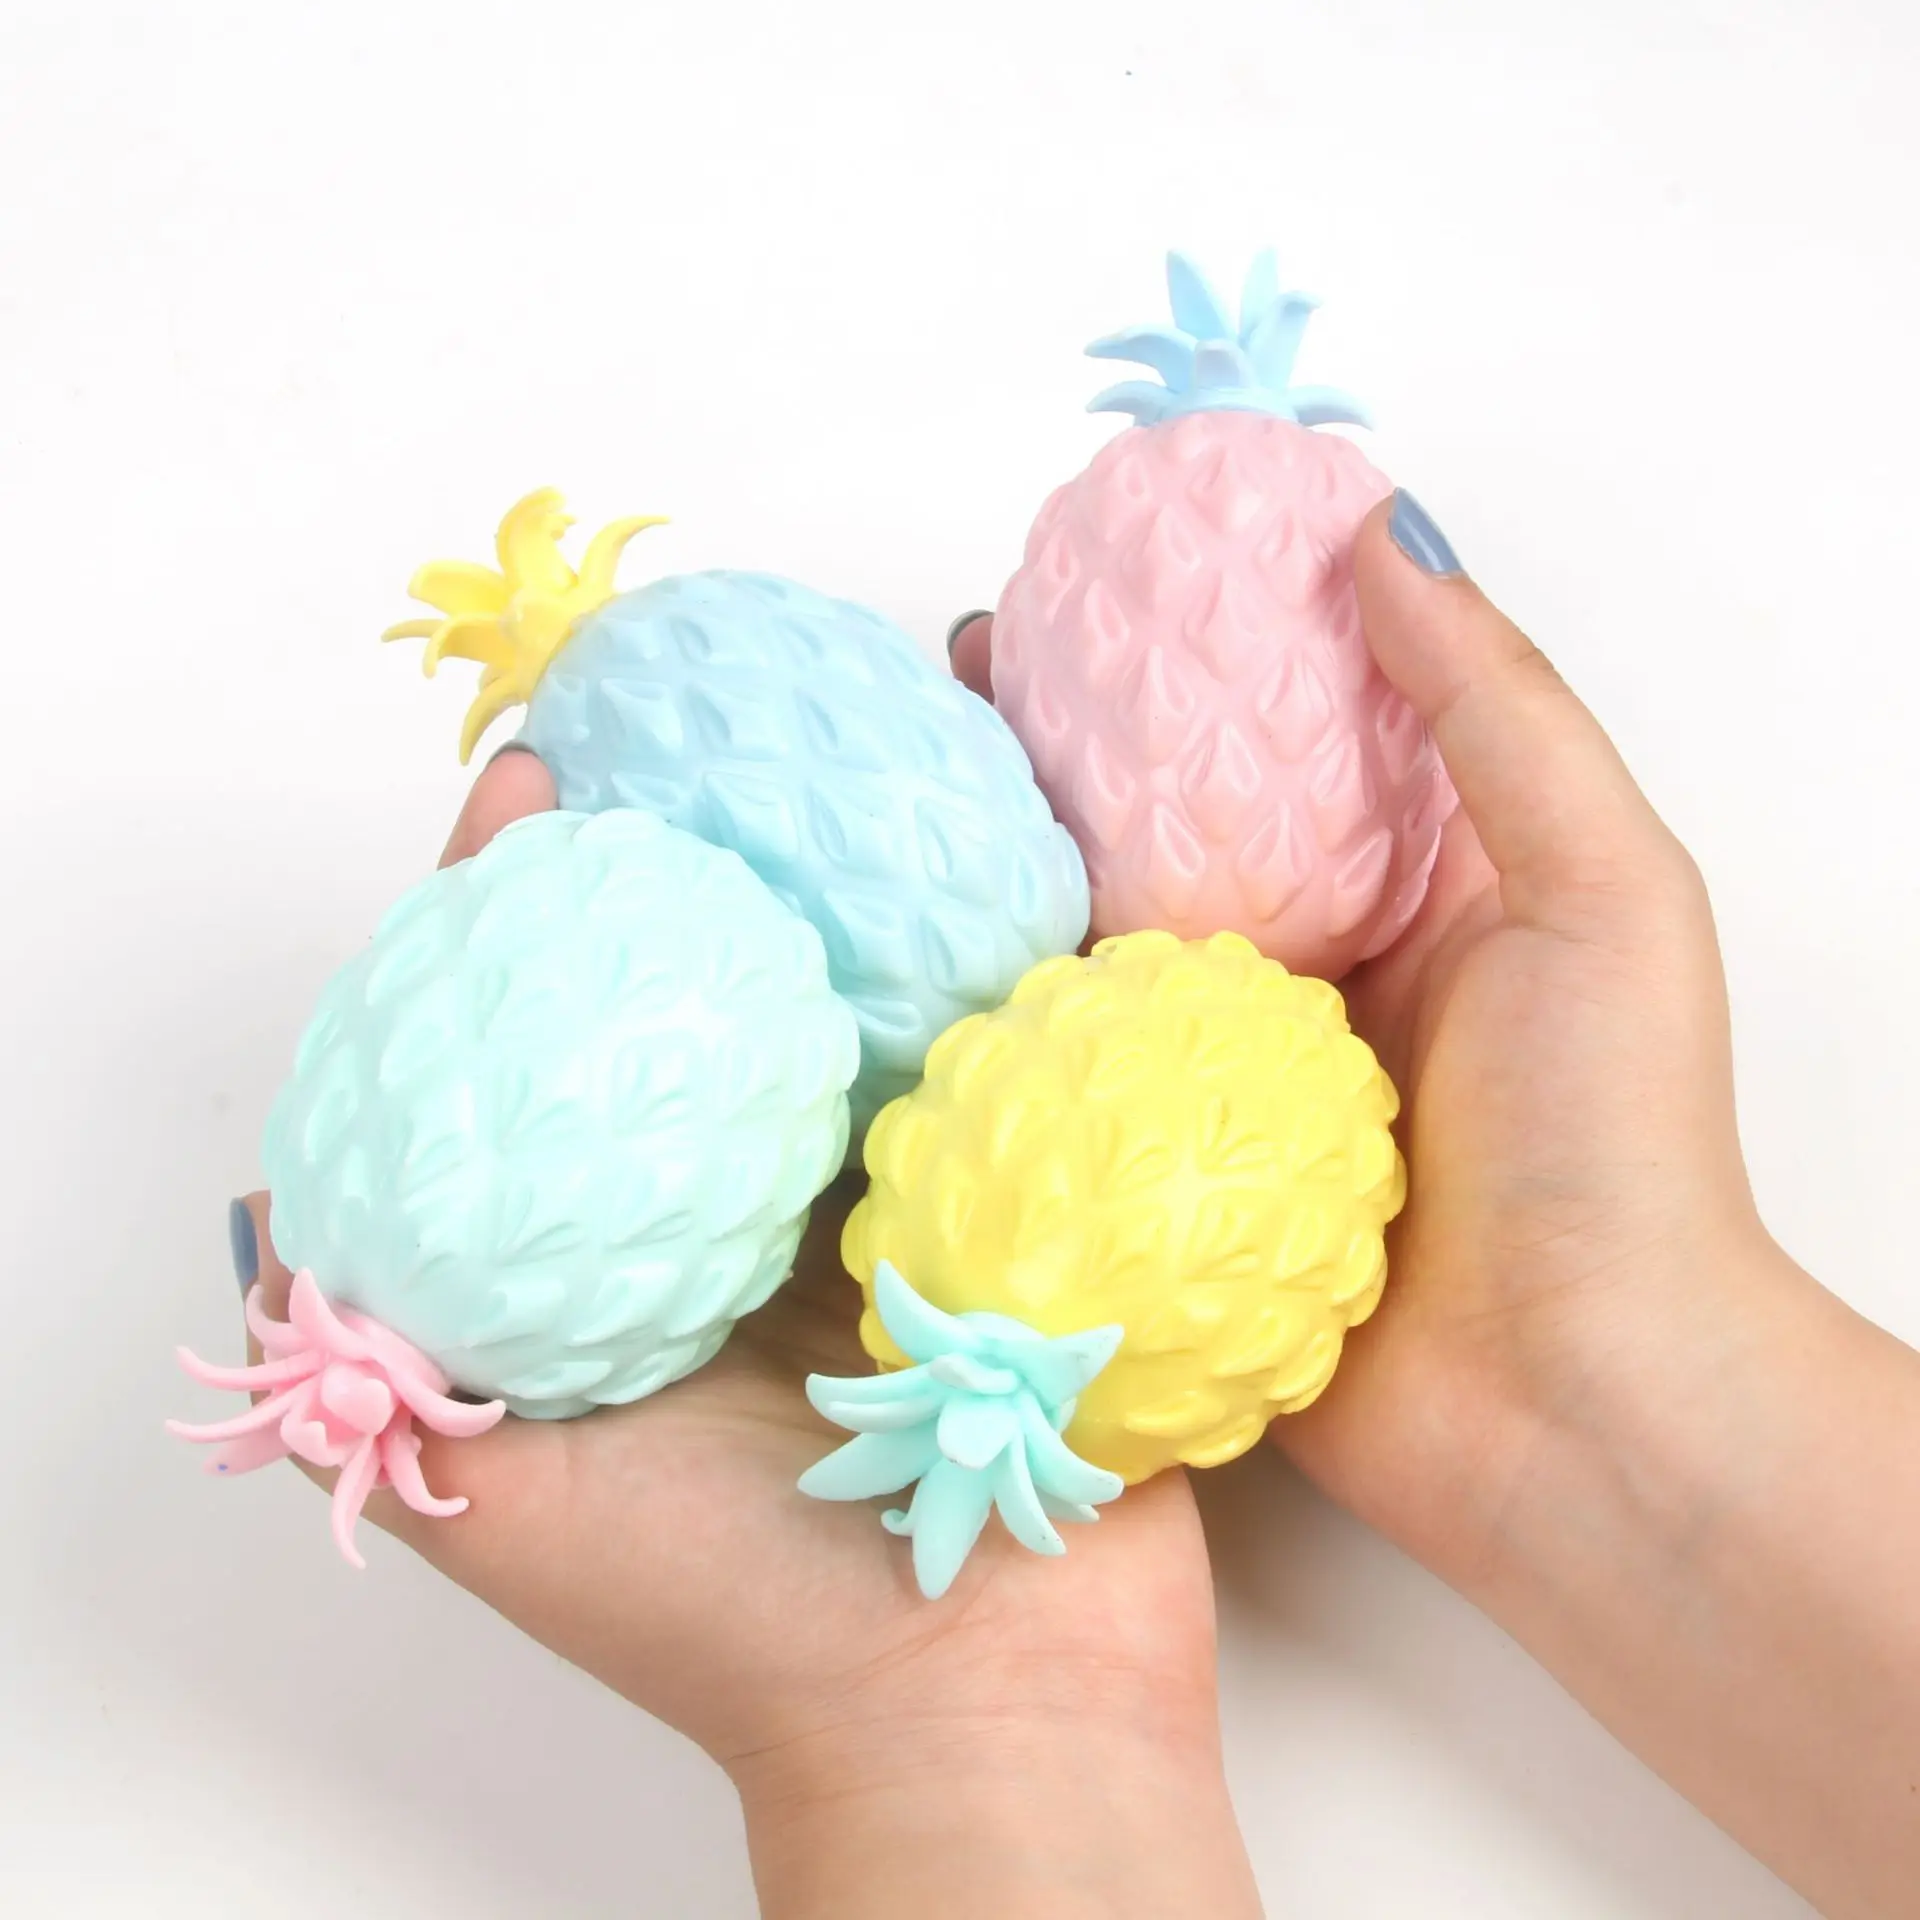 

Funny Fruit Anti Stress Pineapple Squeeze Ball Soft Stress Reliever Adult Vent Emotions Fidget Toy Children Pineapple Squishy